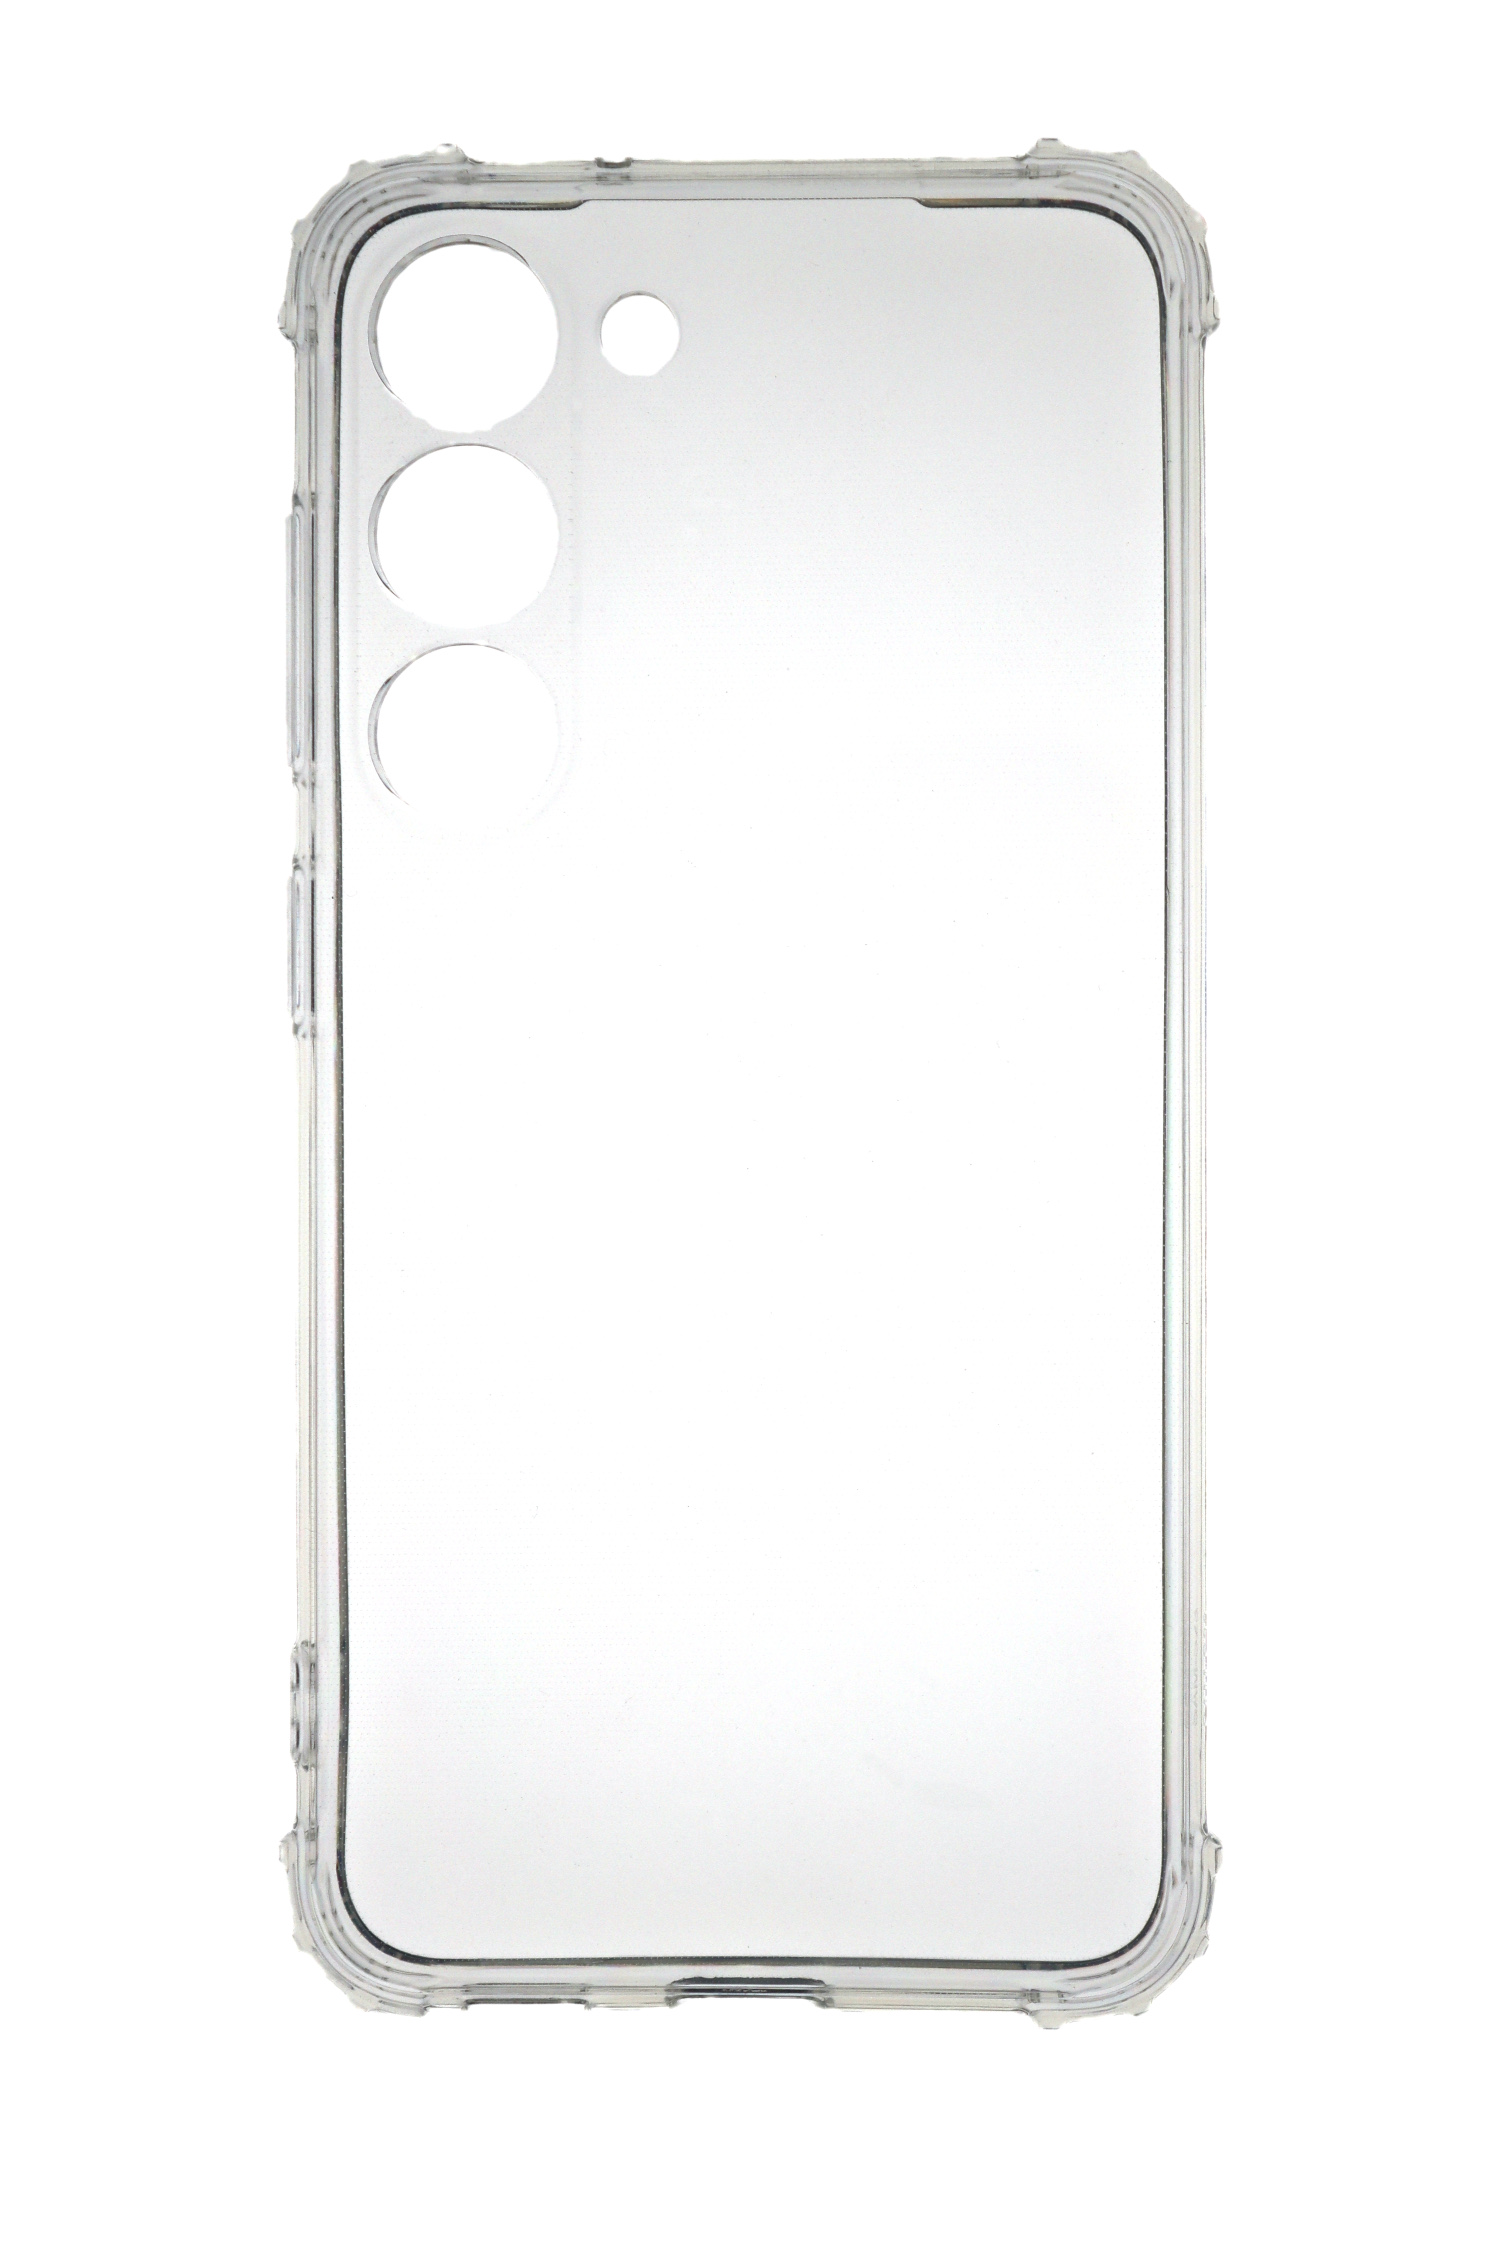 S23, Galaxy Shock Samsung, Case, Transparent TPU mm Anti Backcover, JAMCOVER 1.5